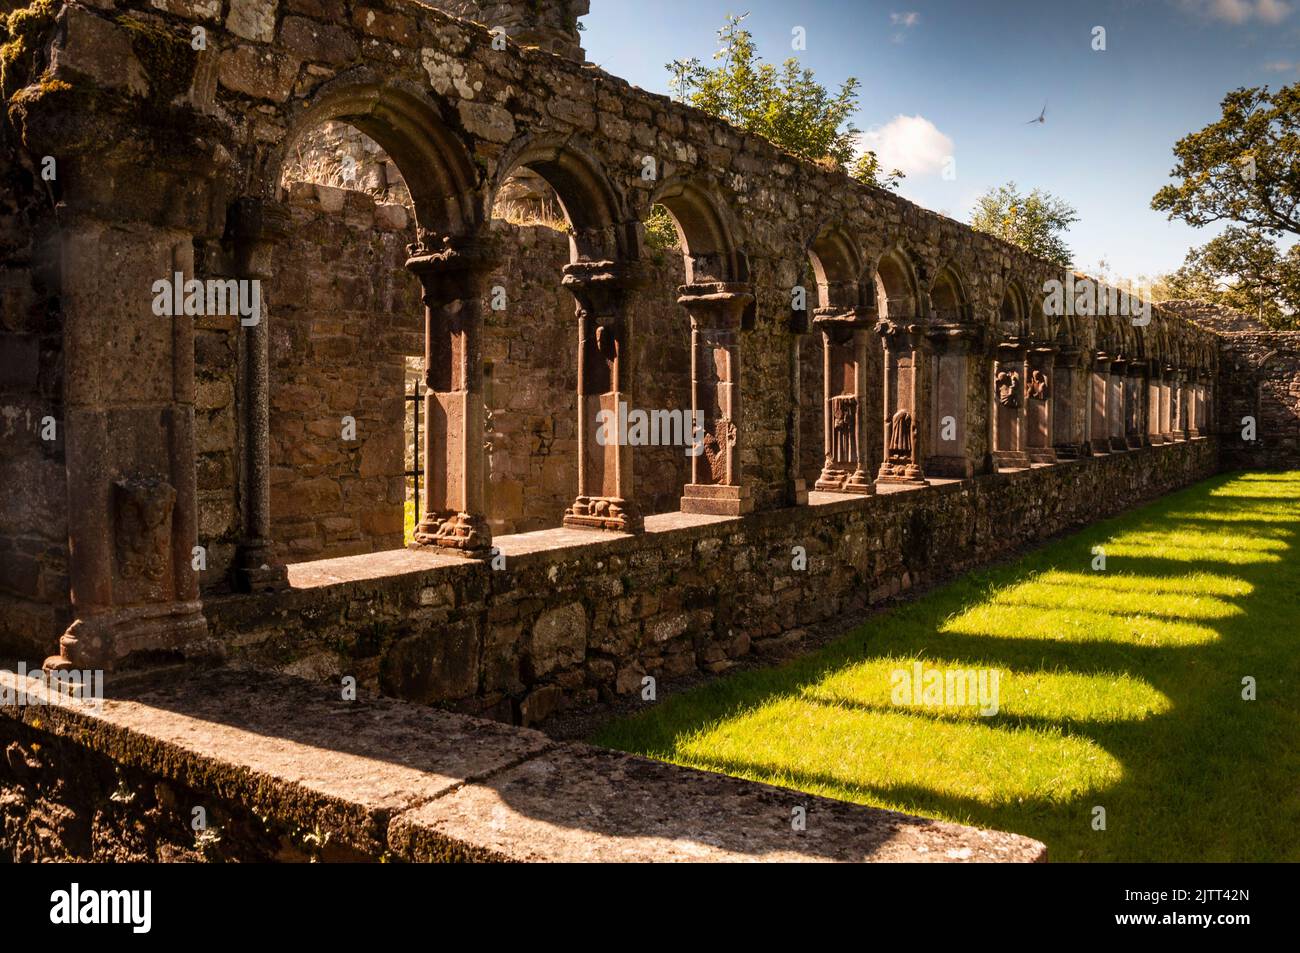 Cloister arcade and arched shadows at Jerpoint Abbey in Thomastown, Ireland. Stock Photo